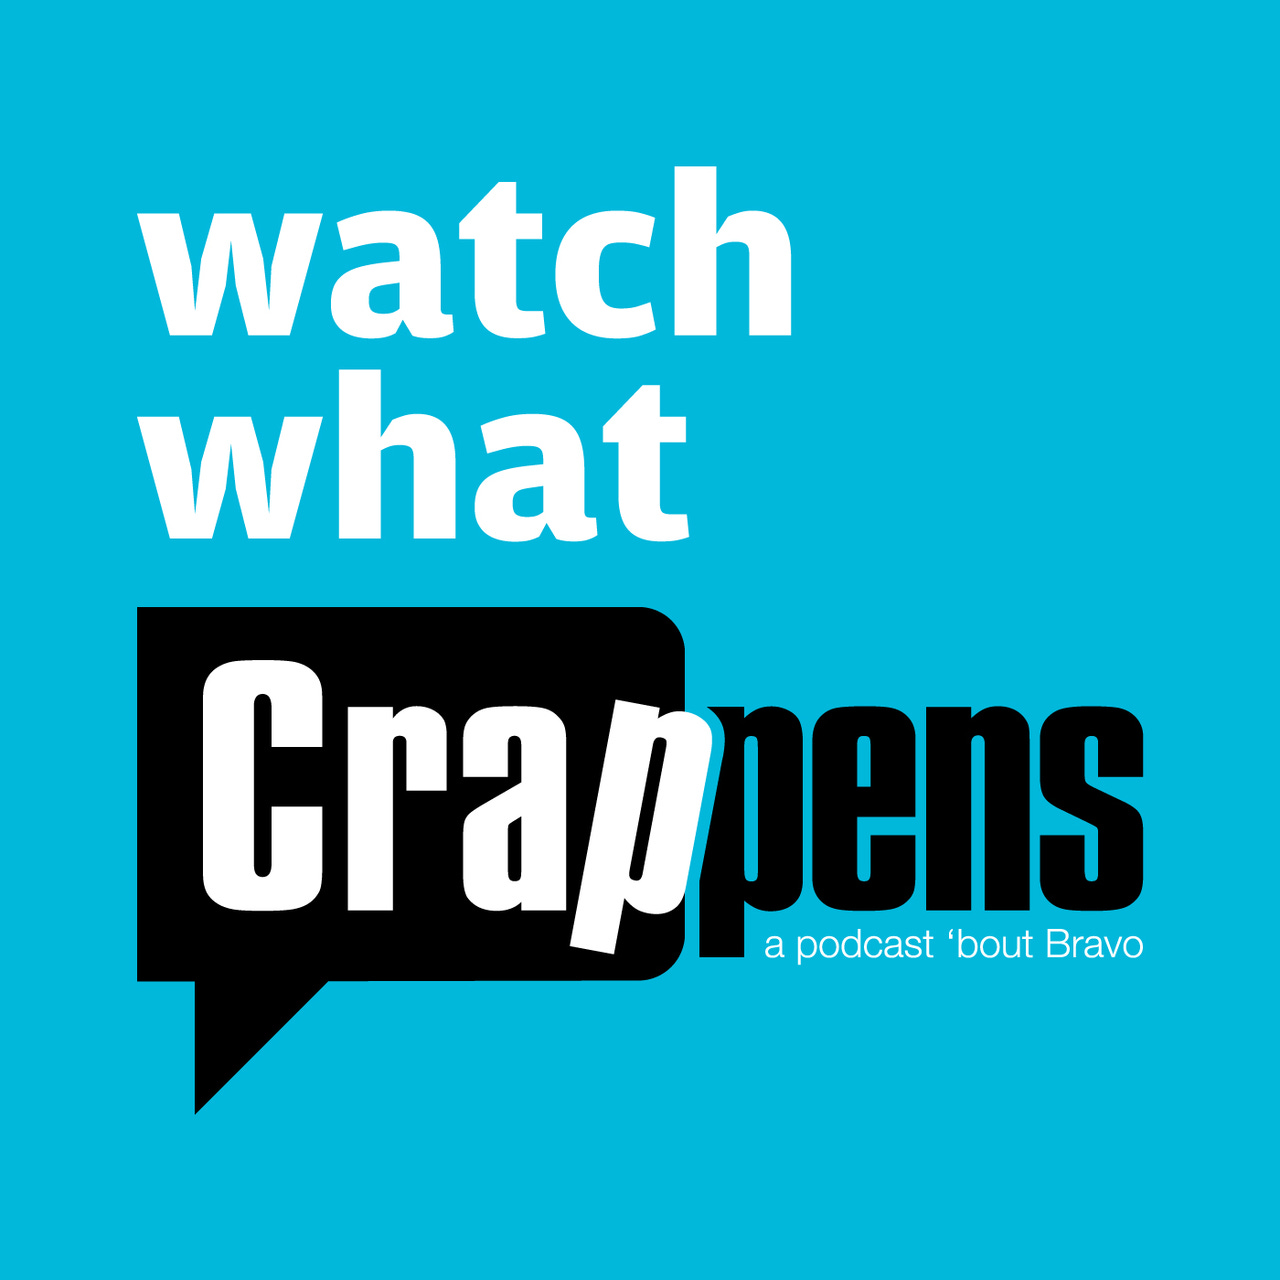 Artwork for Watch What Crappens on Substack